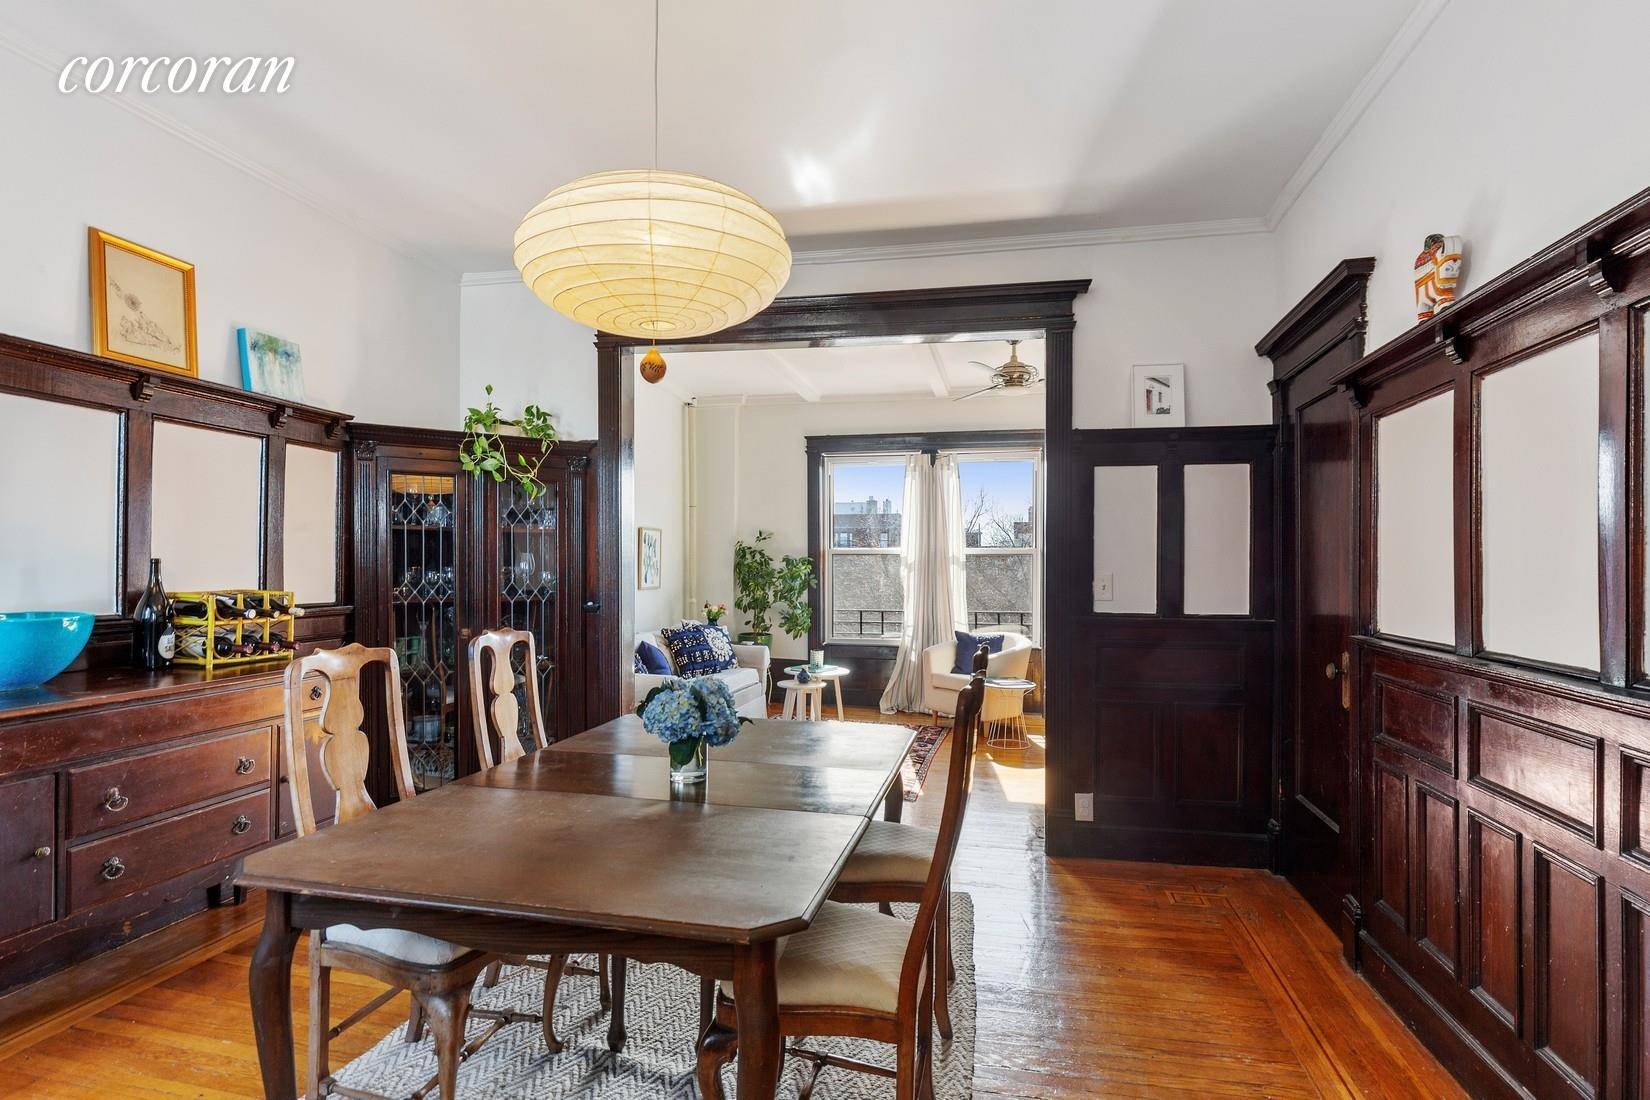 Meticulously preserved period detail, a renovated kitchen and bath, two bedrooms, and a FORMAL DINING ROOM This sprawling prewar coop apartment is truly special.